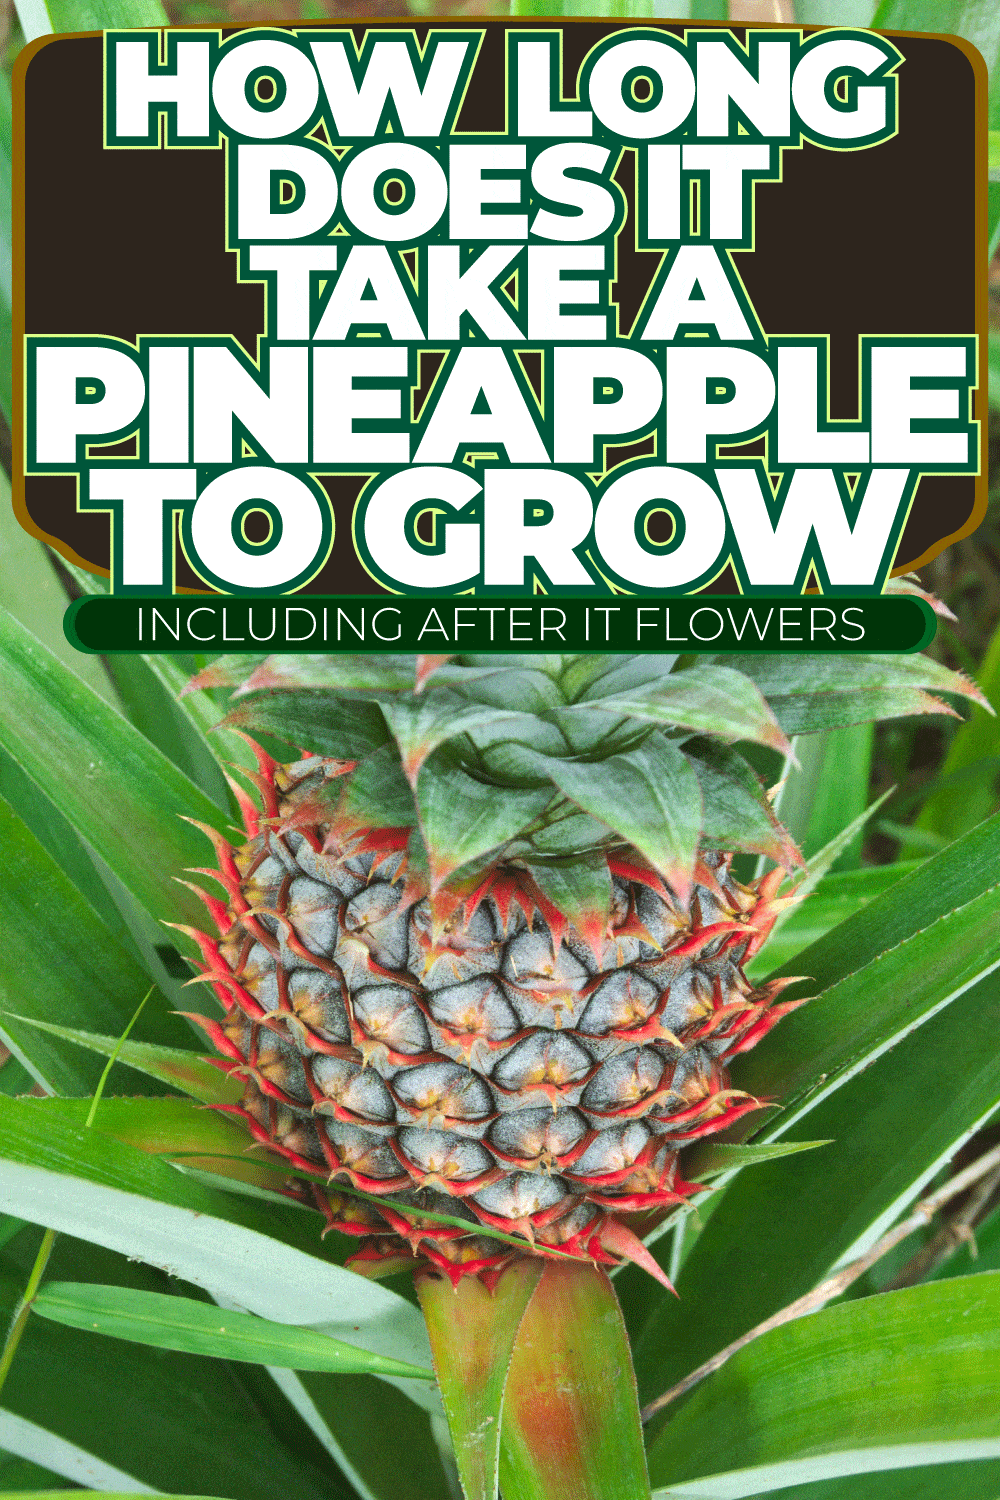 How Long Does It Take A Pineapple To Grow [Inc. After It Flowers]